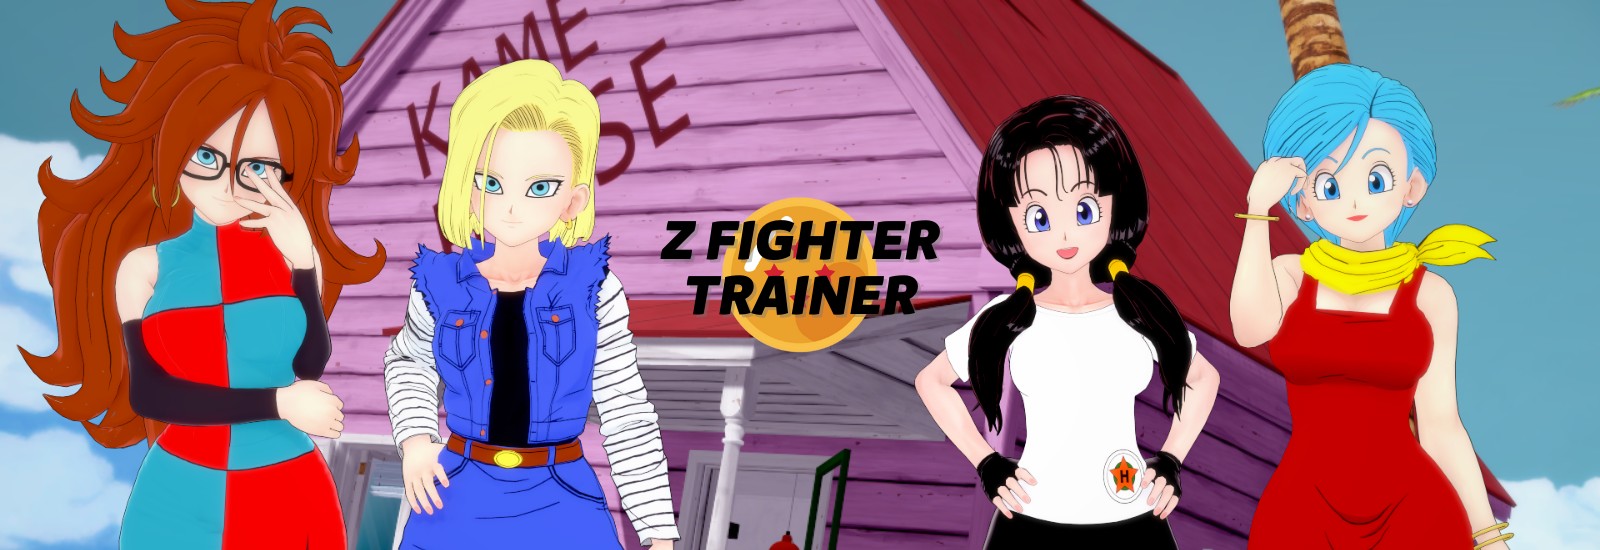 Z Fighter Trainer Adult Game Android Apk Download (3)